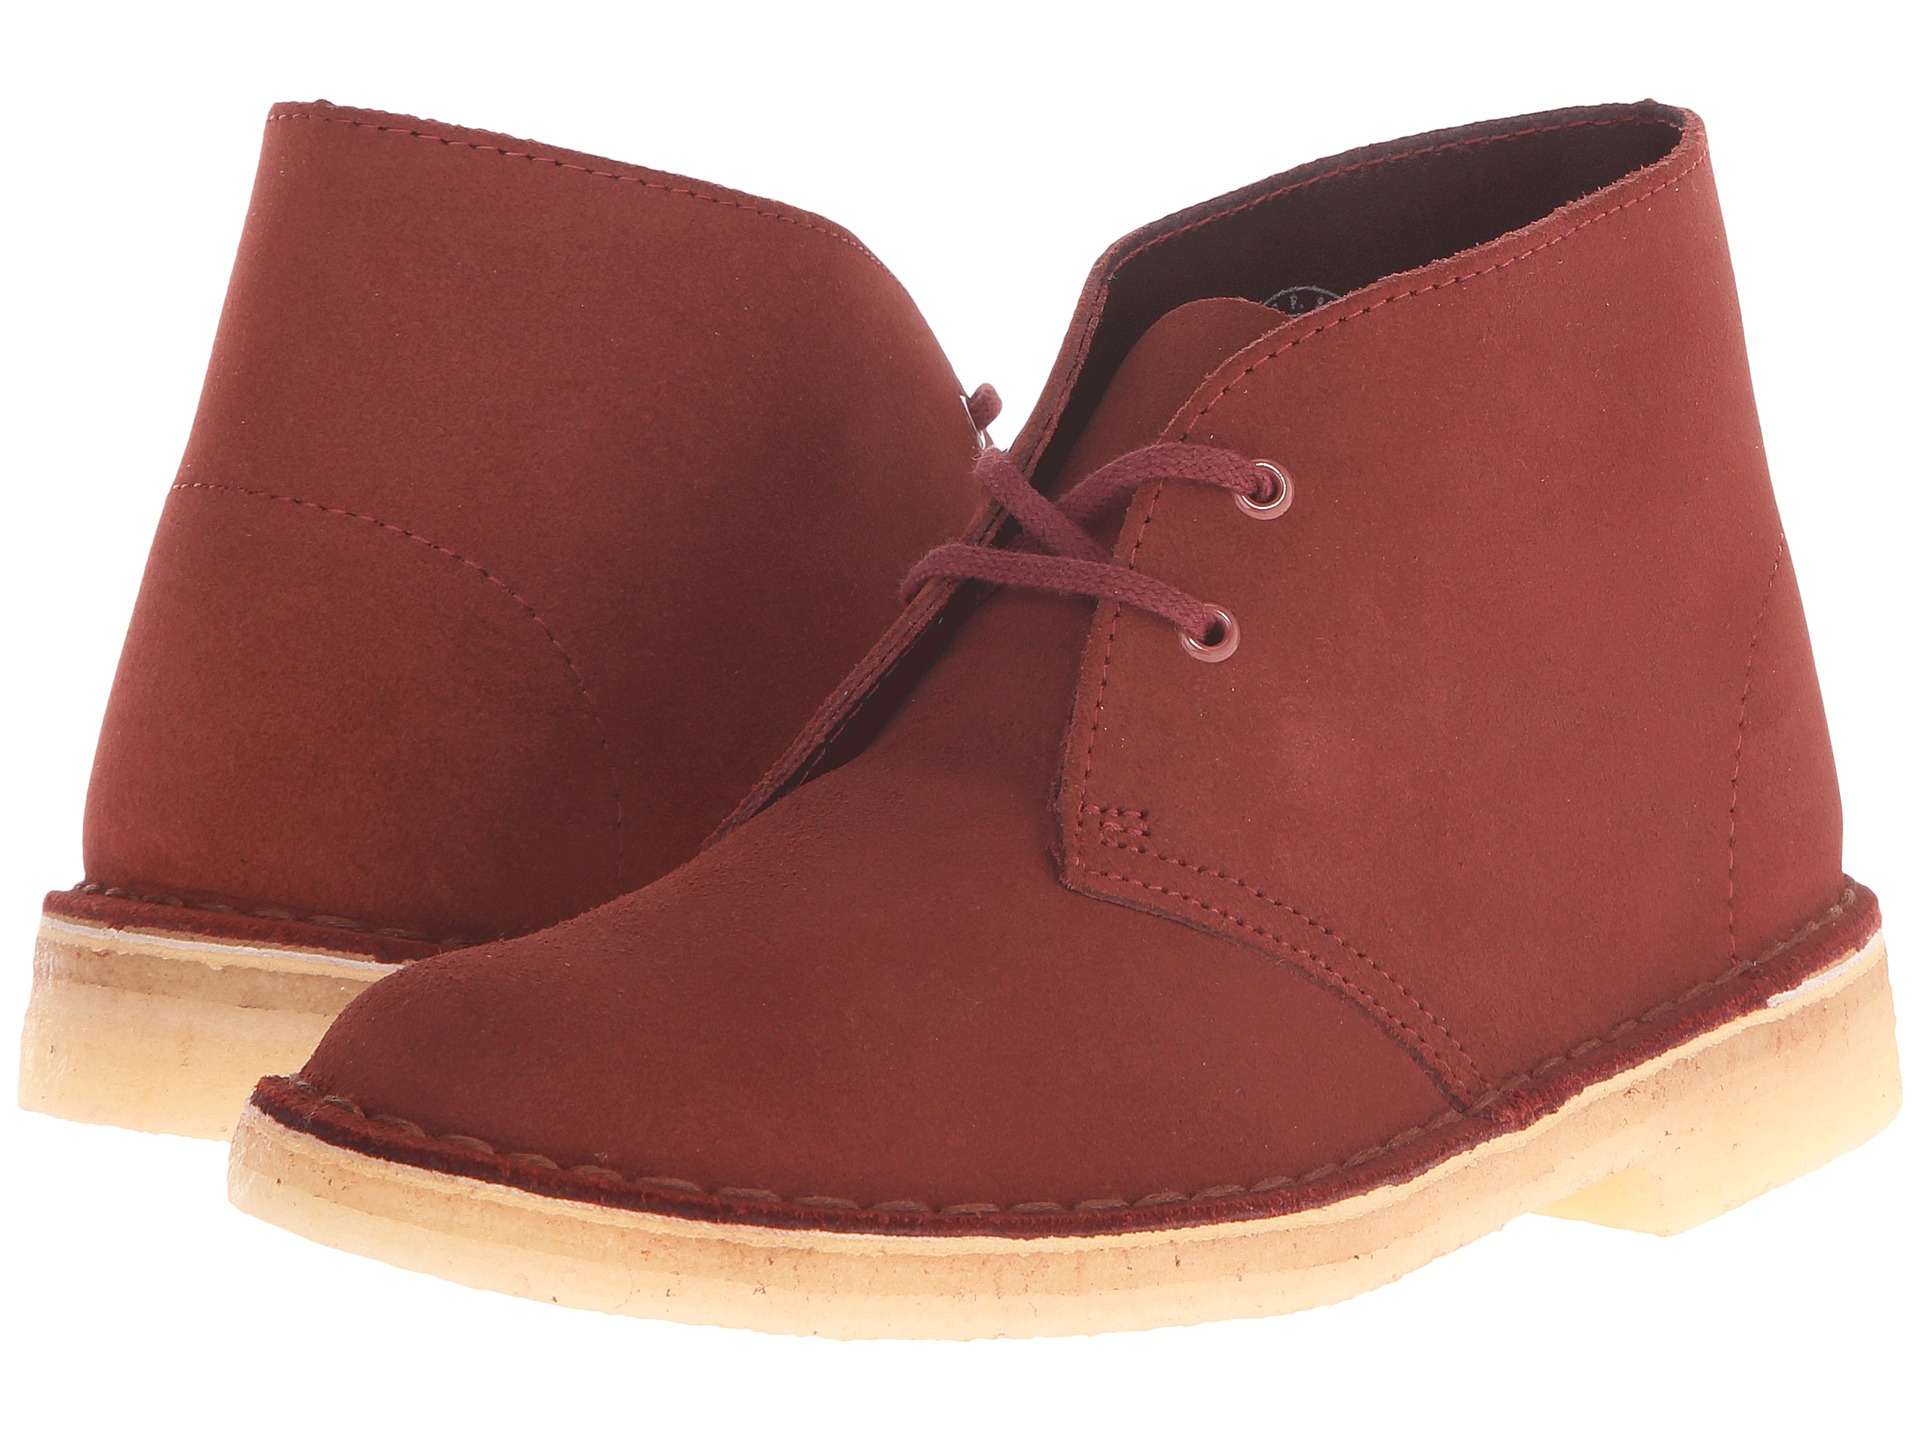 clarks red boots